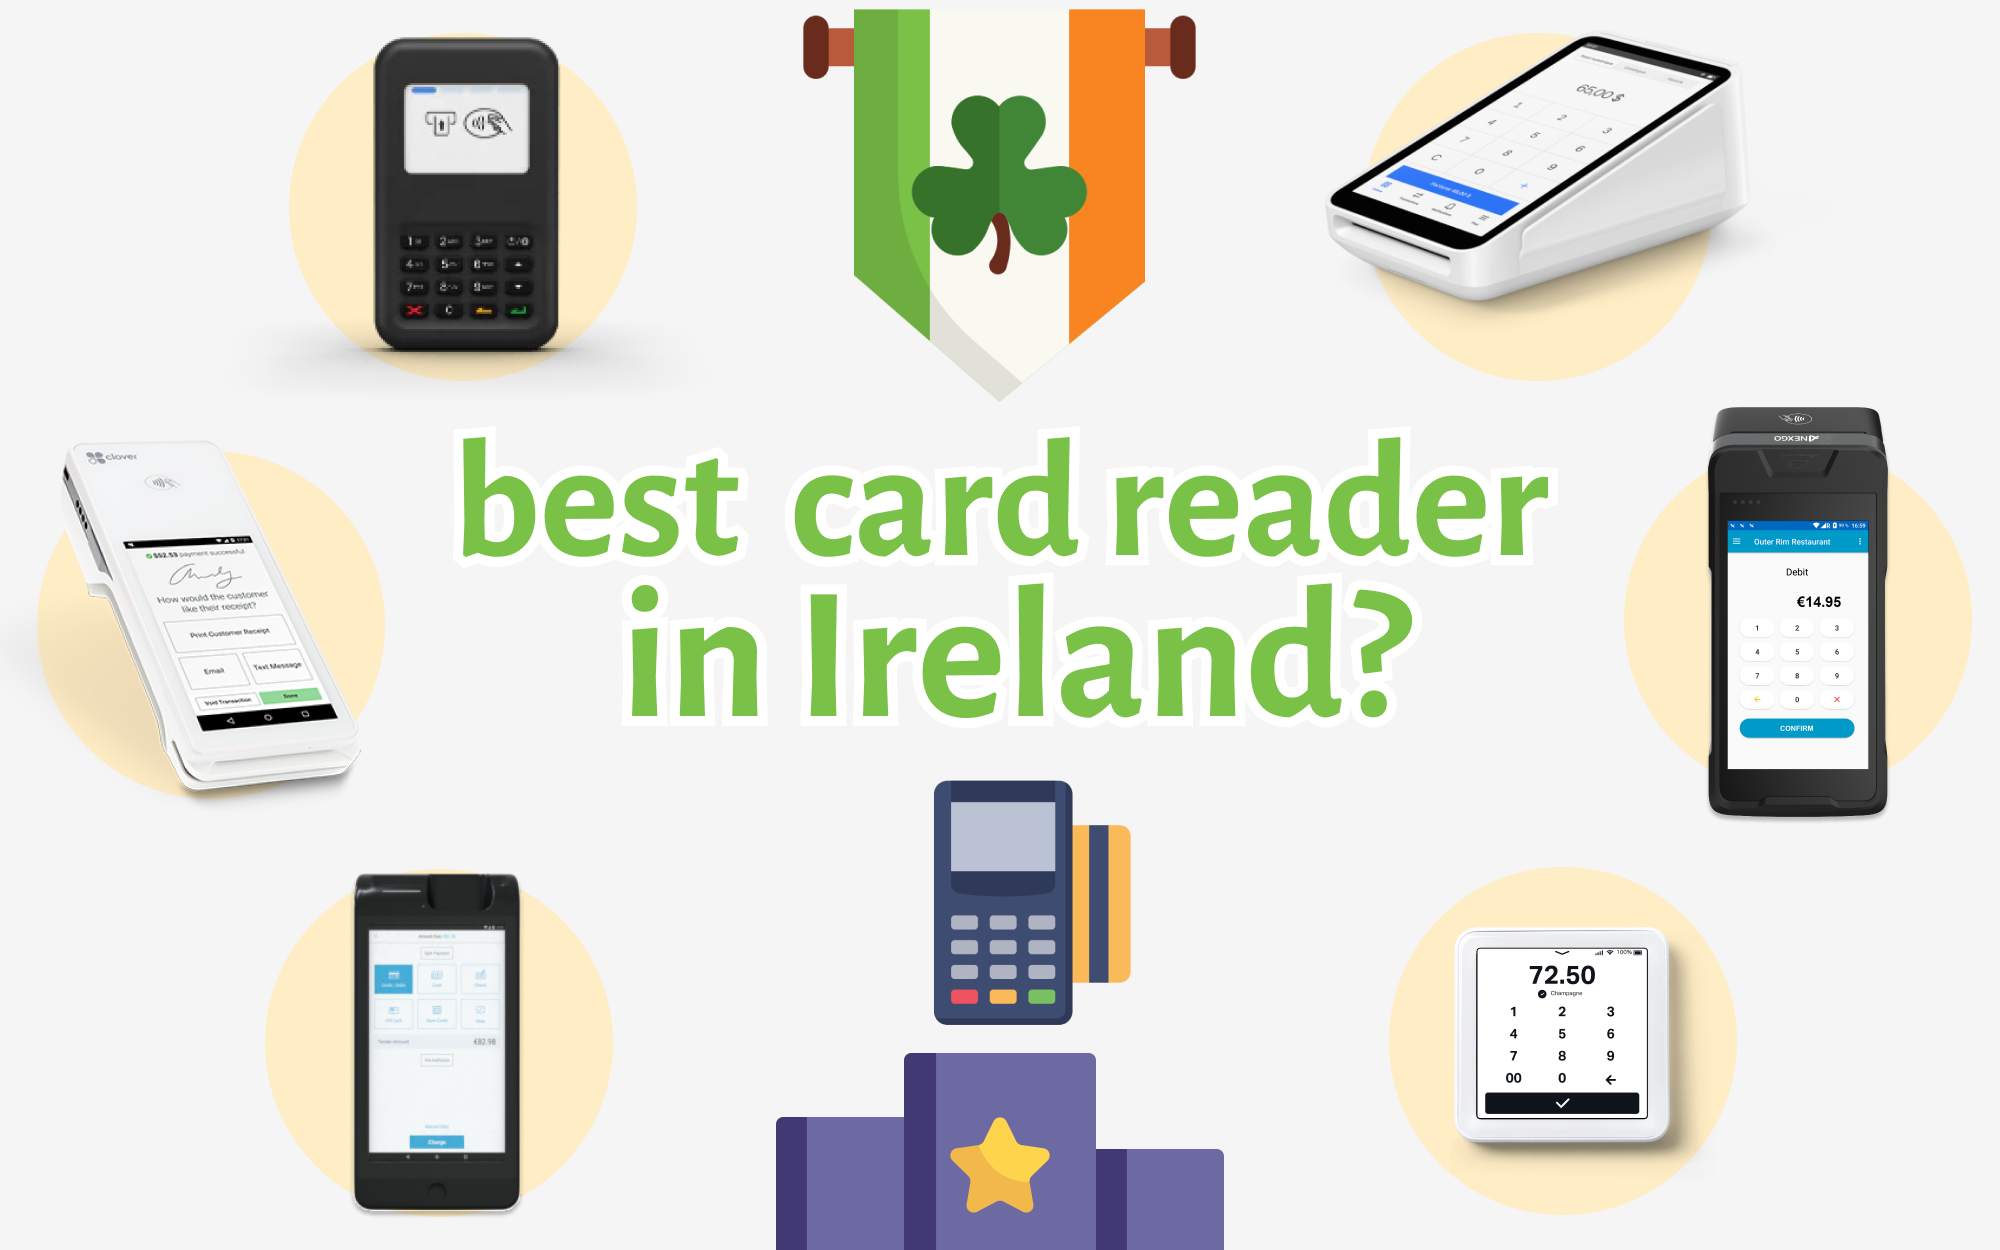 Finding the best card reader in Ireland - 2022